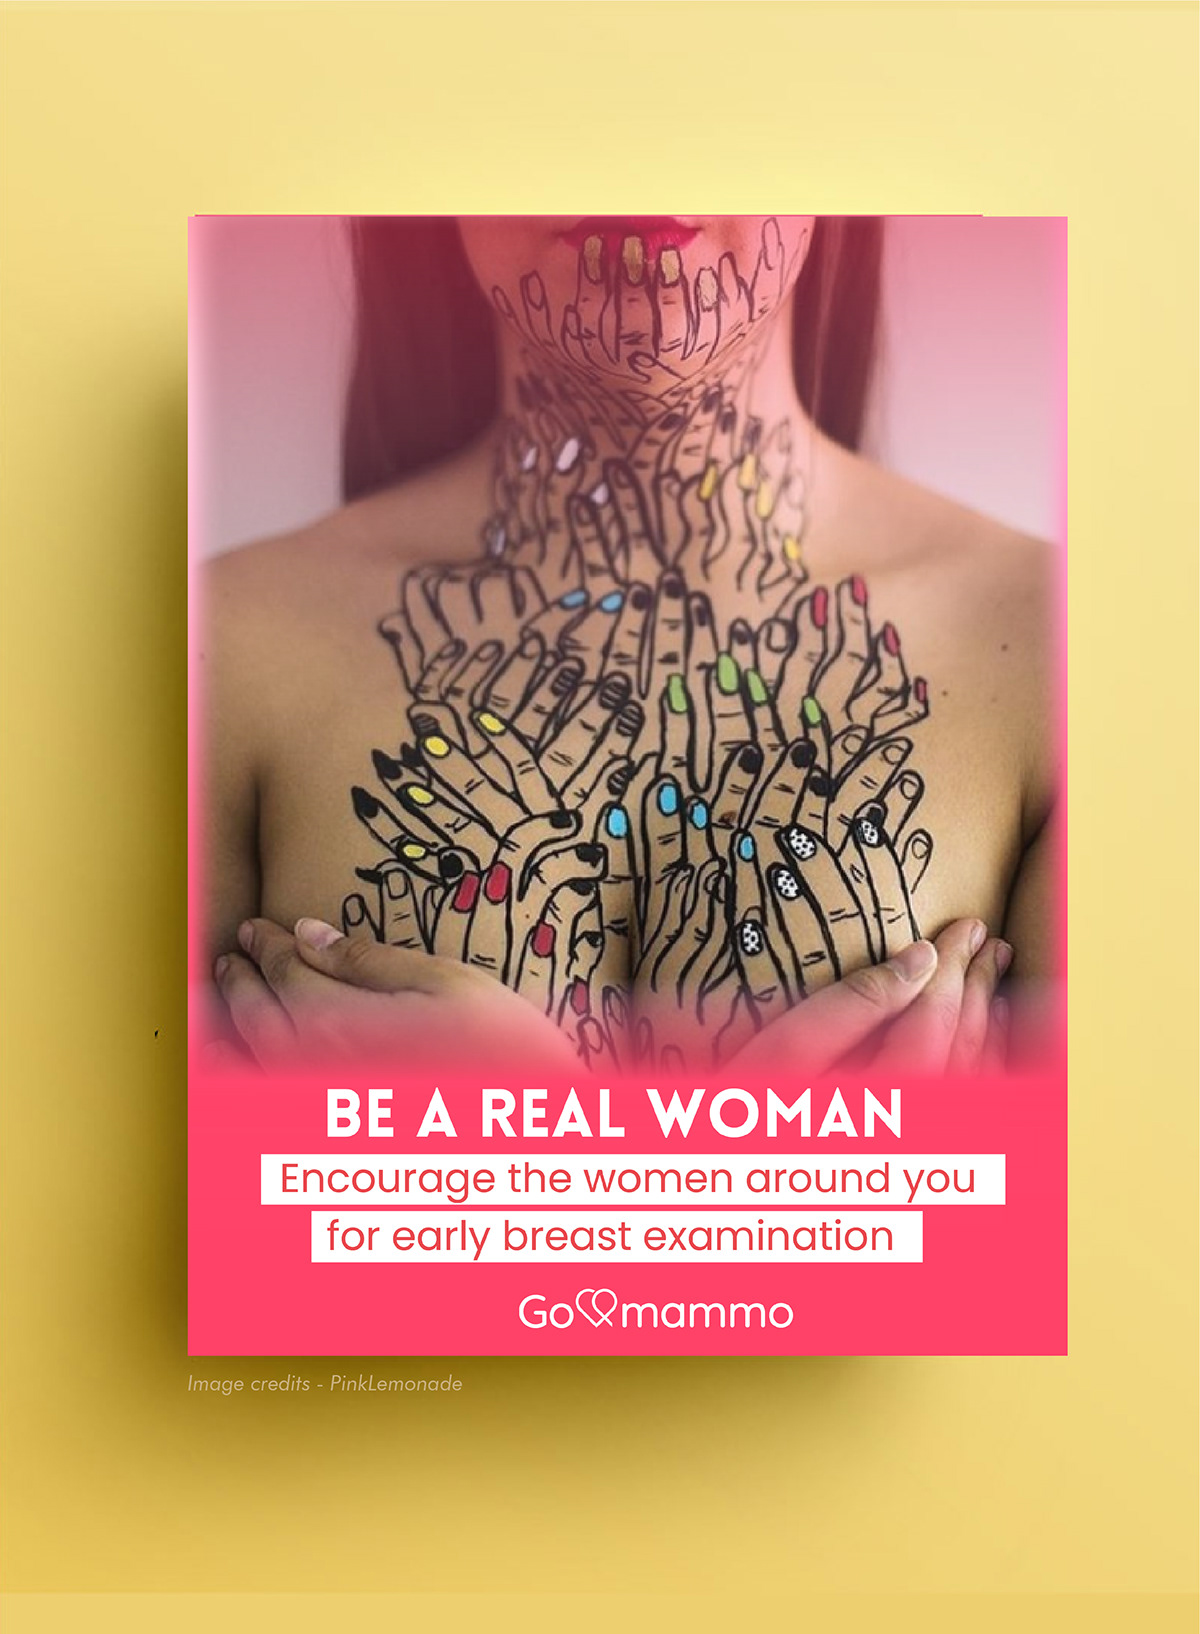 social issue breast cancer cancer awareness Illustrator photoshop campaign poster